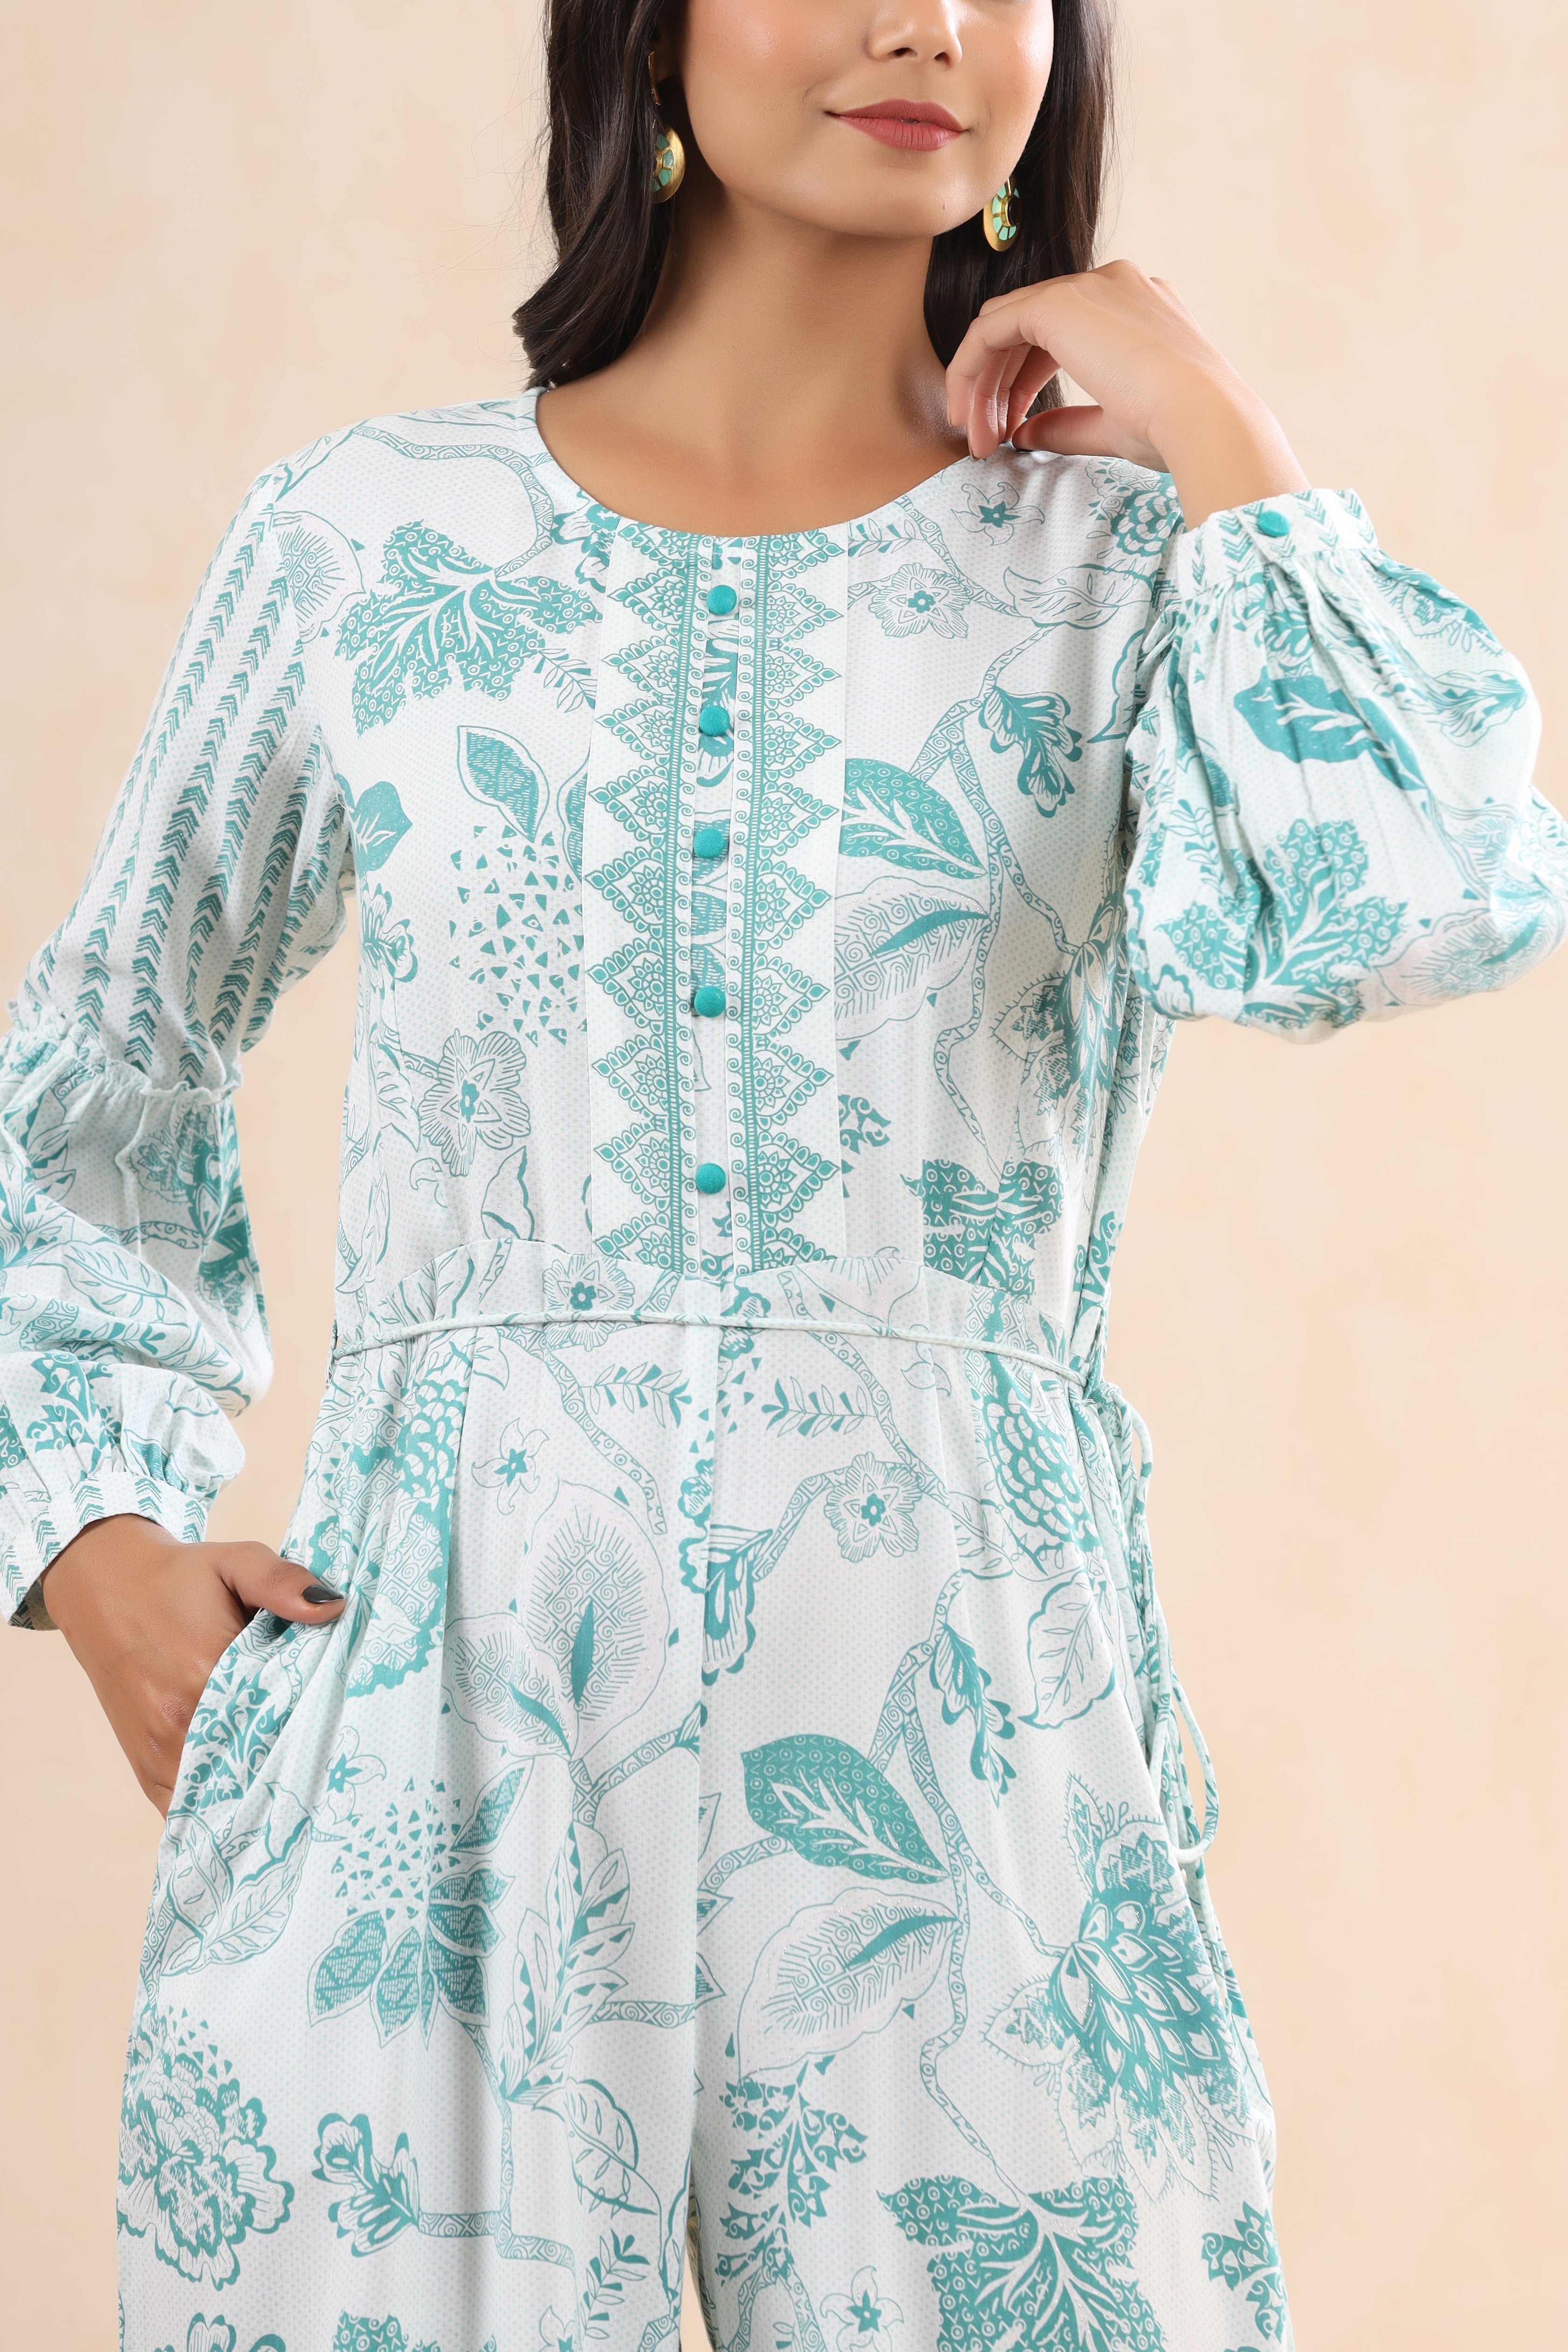 Juniper Teal Rayon Printed Ethnic Jumpsuit with Belt